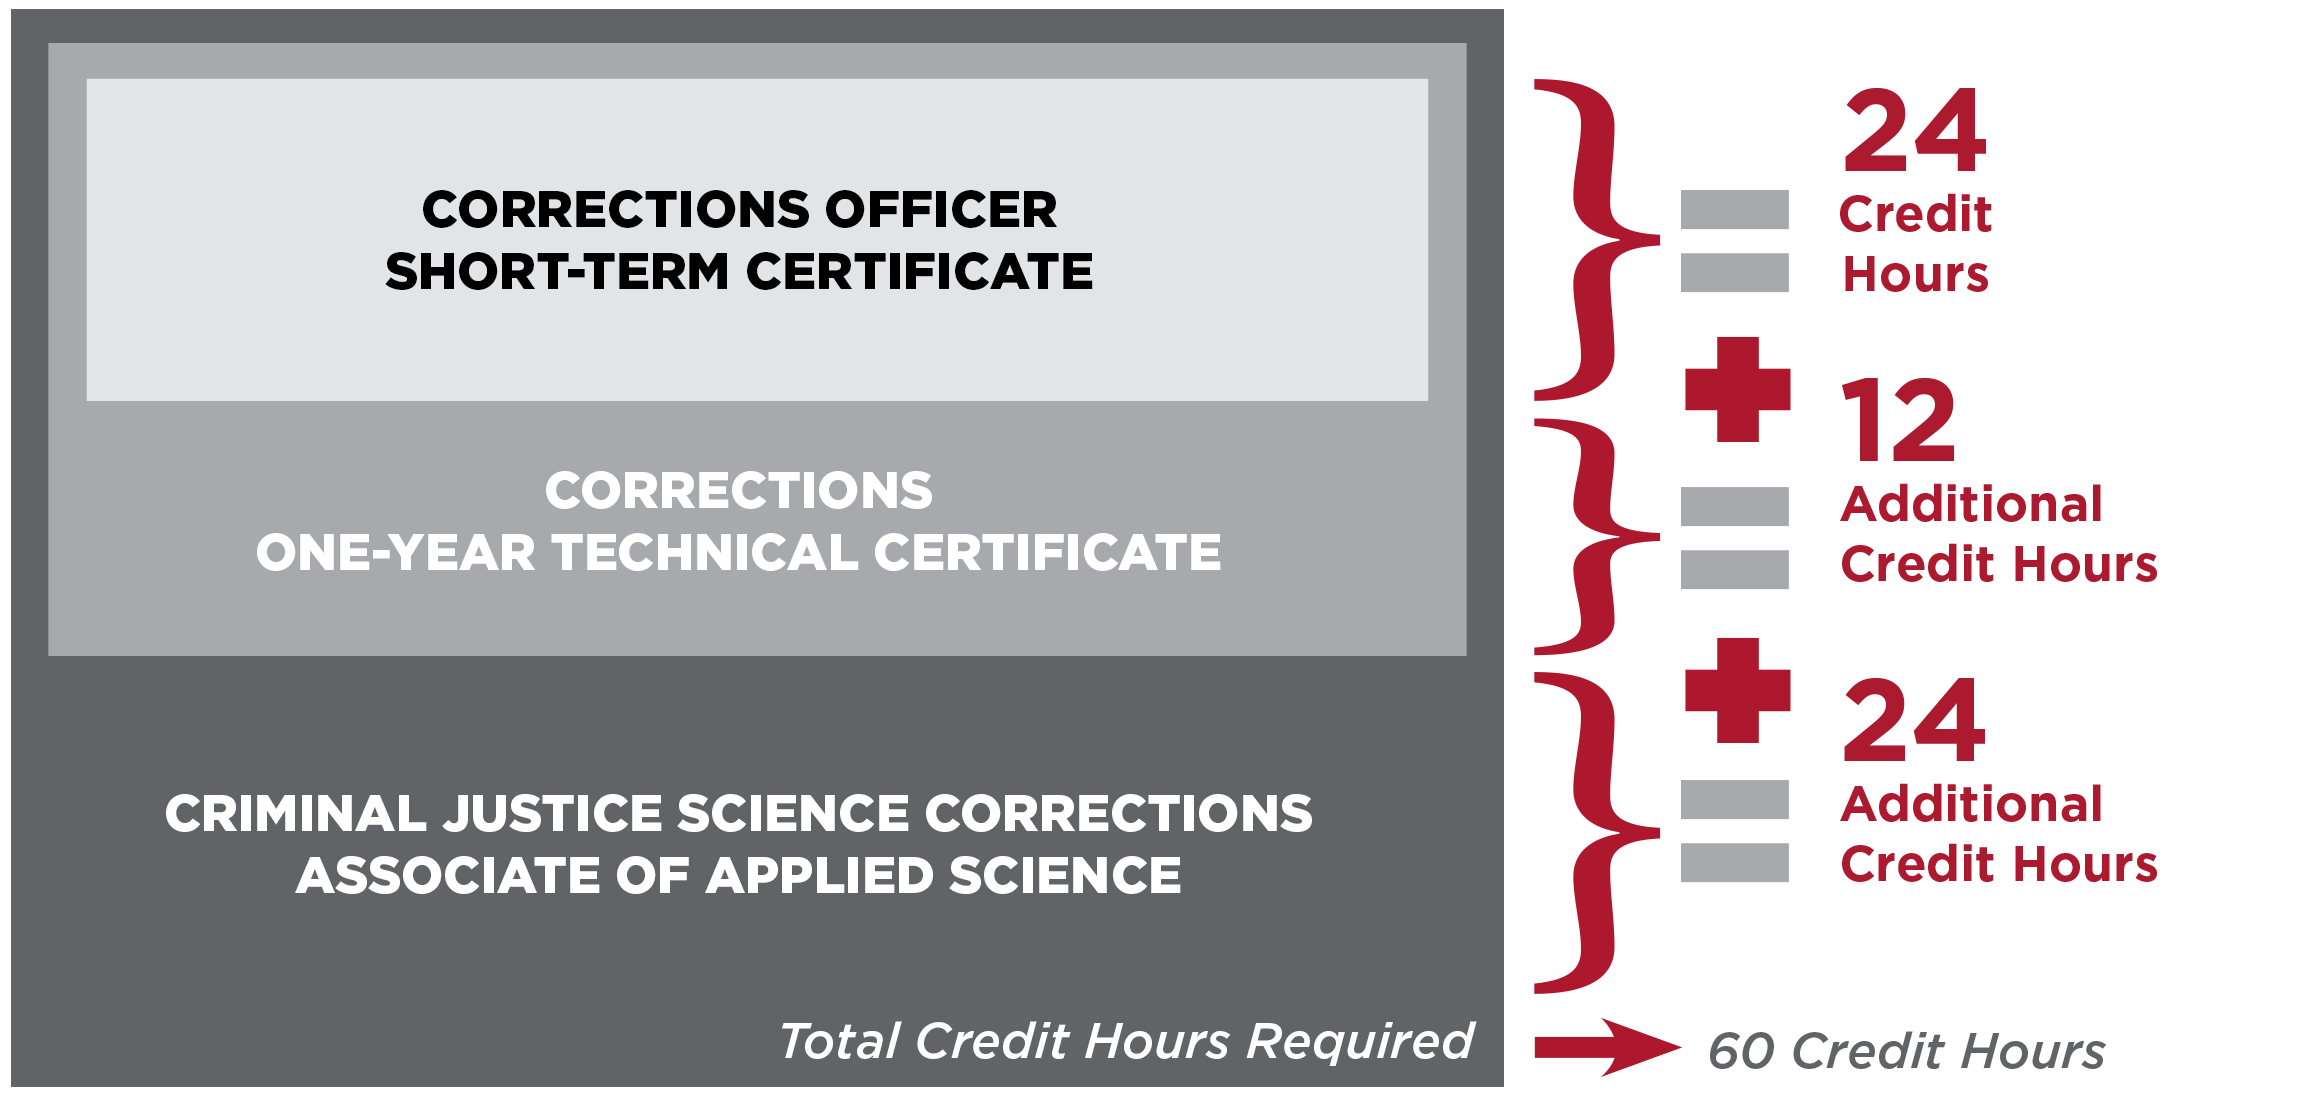 Corrections Officer Short-Term Certificate 24 Credit hours + 12 additional credit hours for the Corrections One-Year Technical Certificate + 24 additional credit hours for the Criminal Justice Science Corrections Associate of Applied Science = 60 total credit hours required